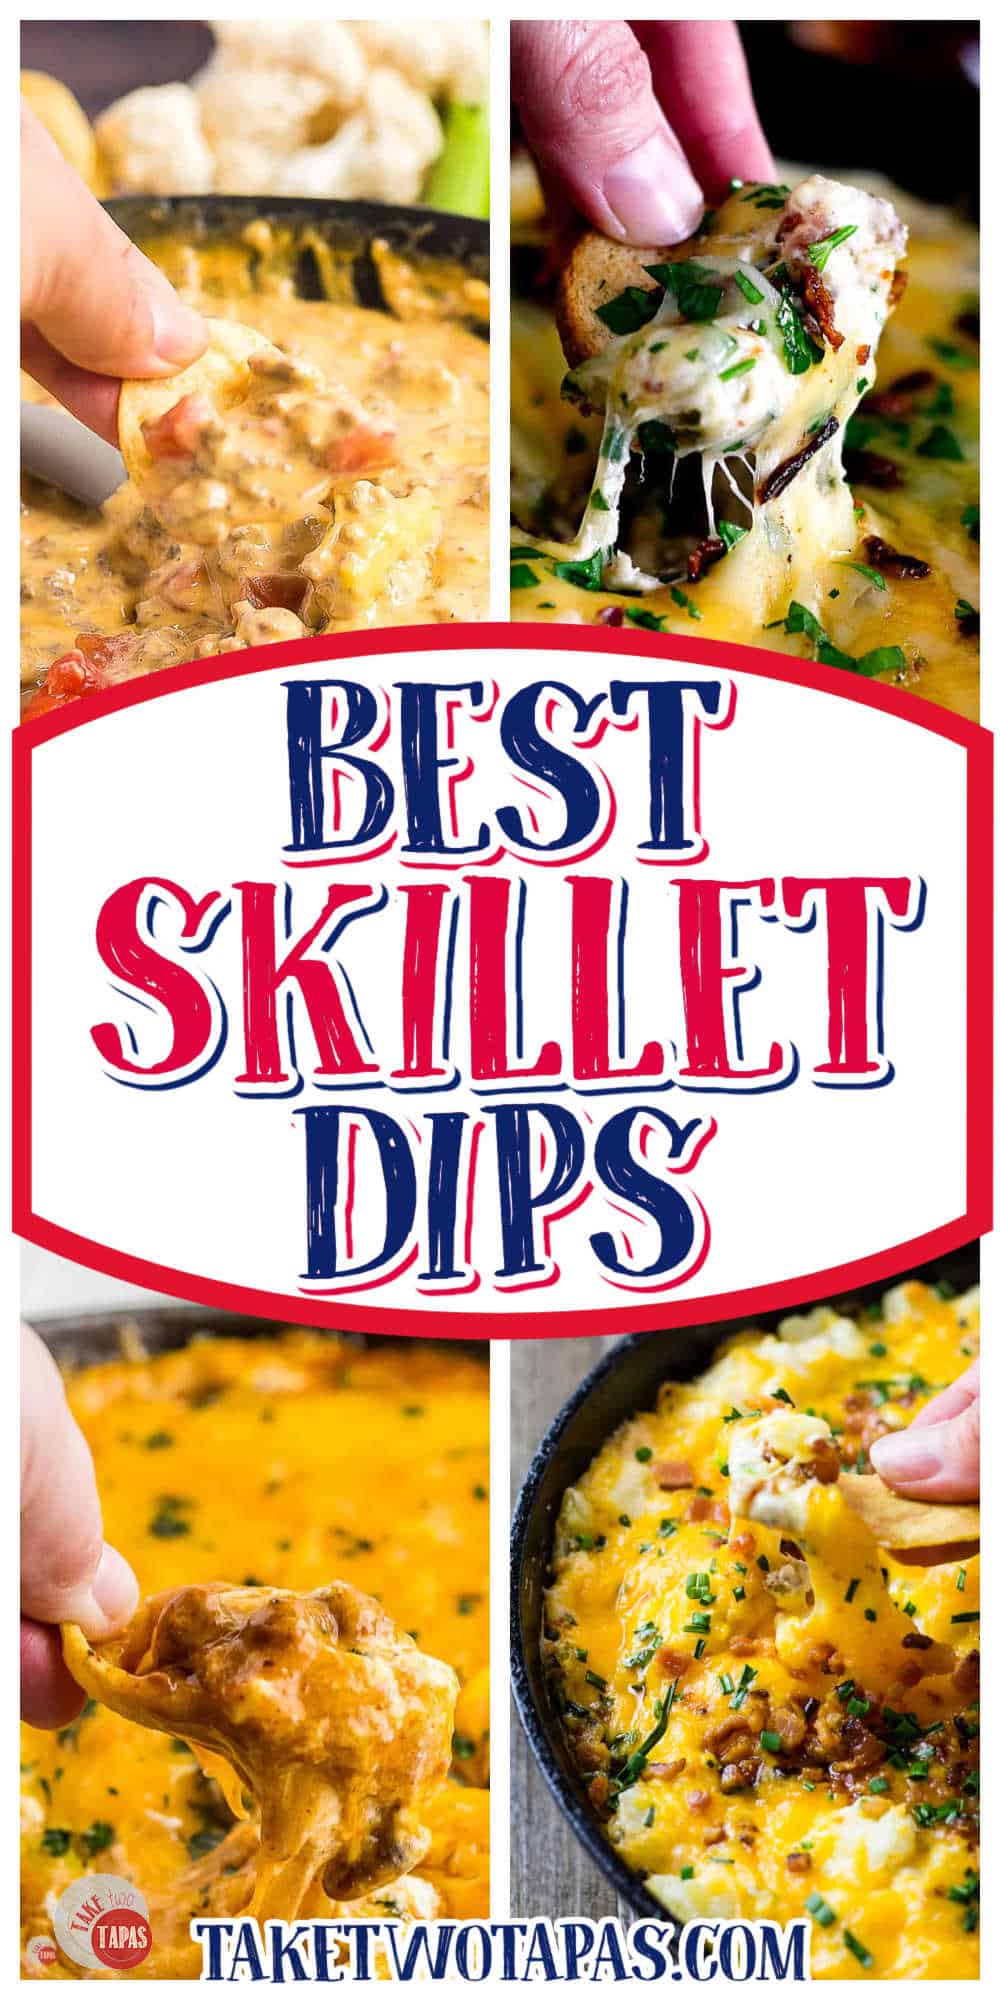 collage of skillet dips with text "best skillet dips"